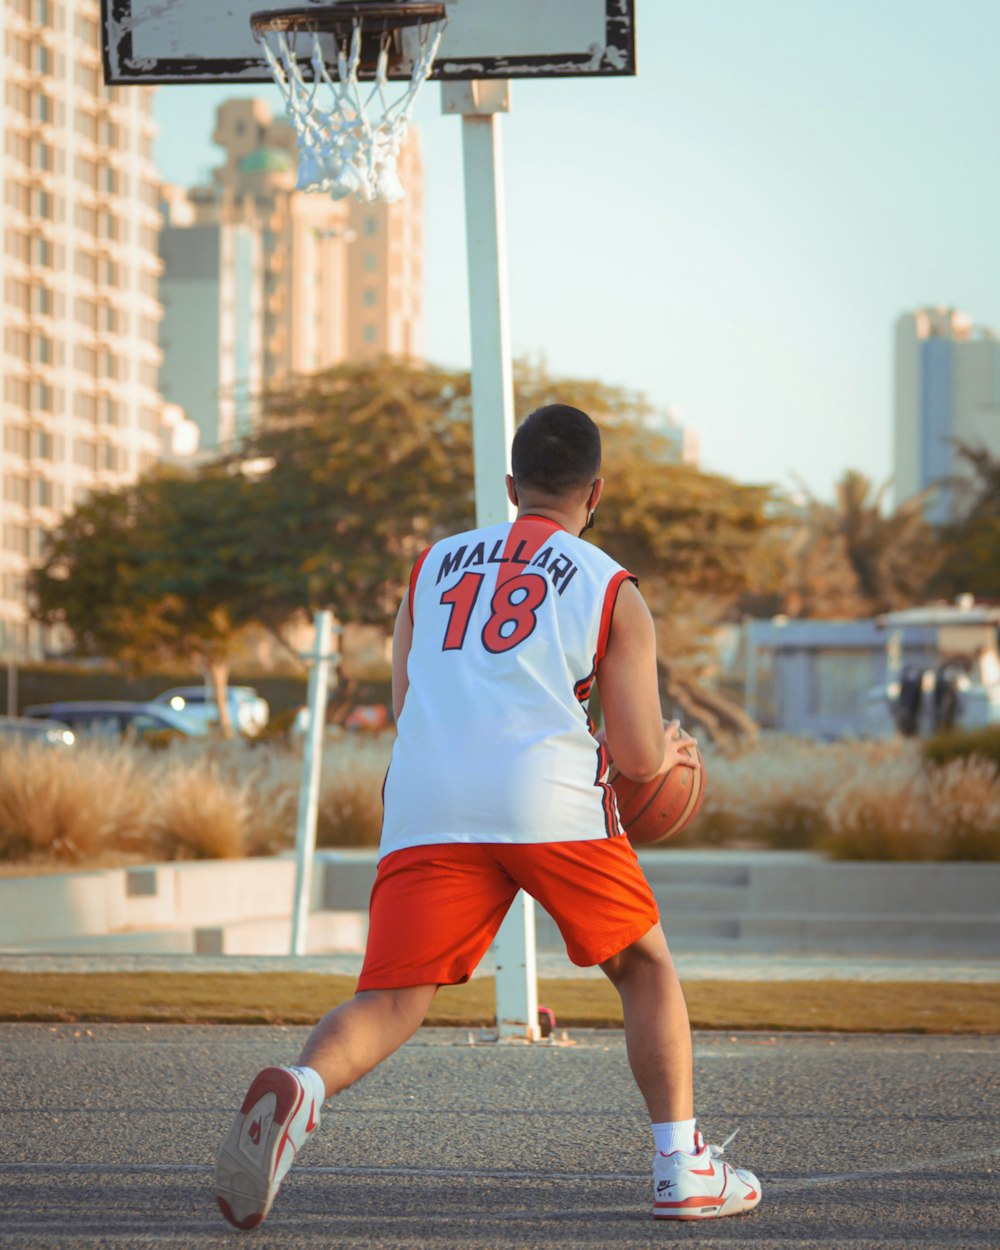 man in white and orange jersey shirt and red shorts running on road during daytime